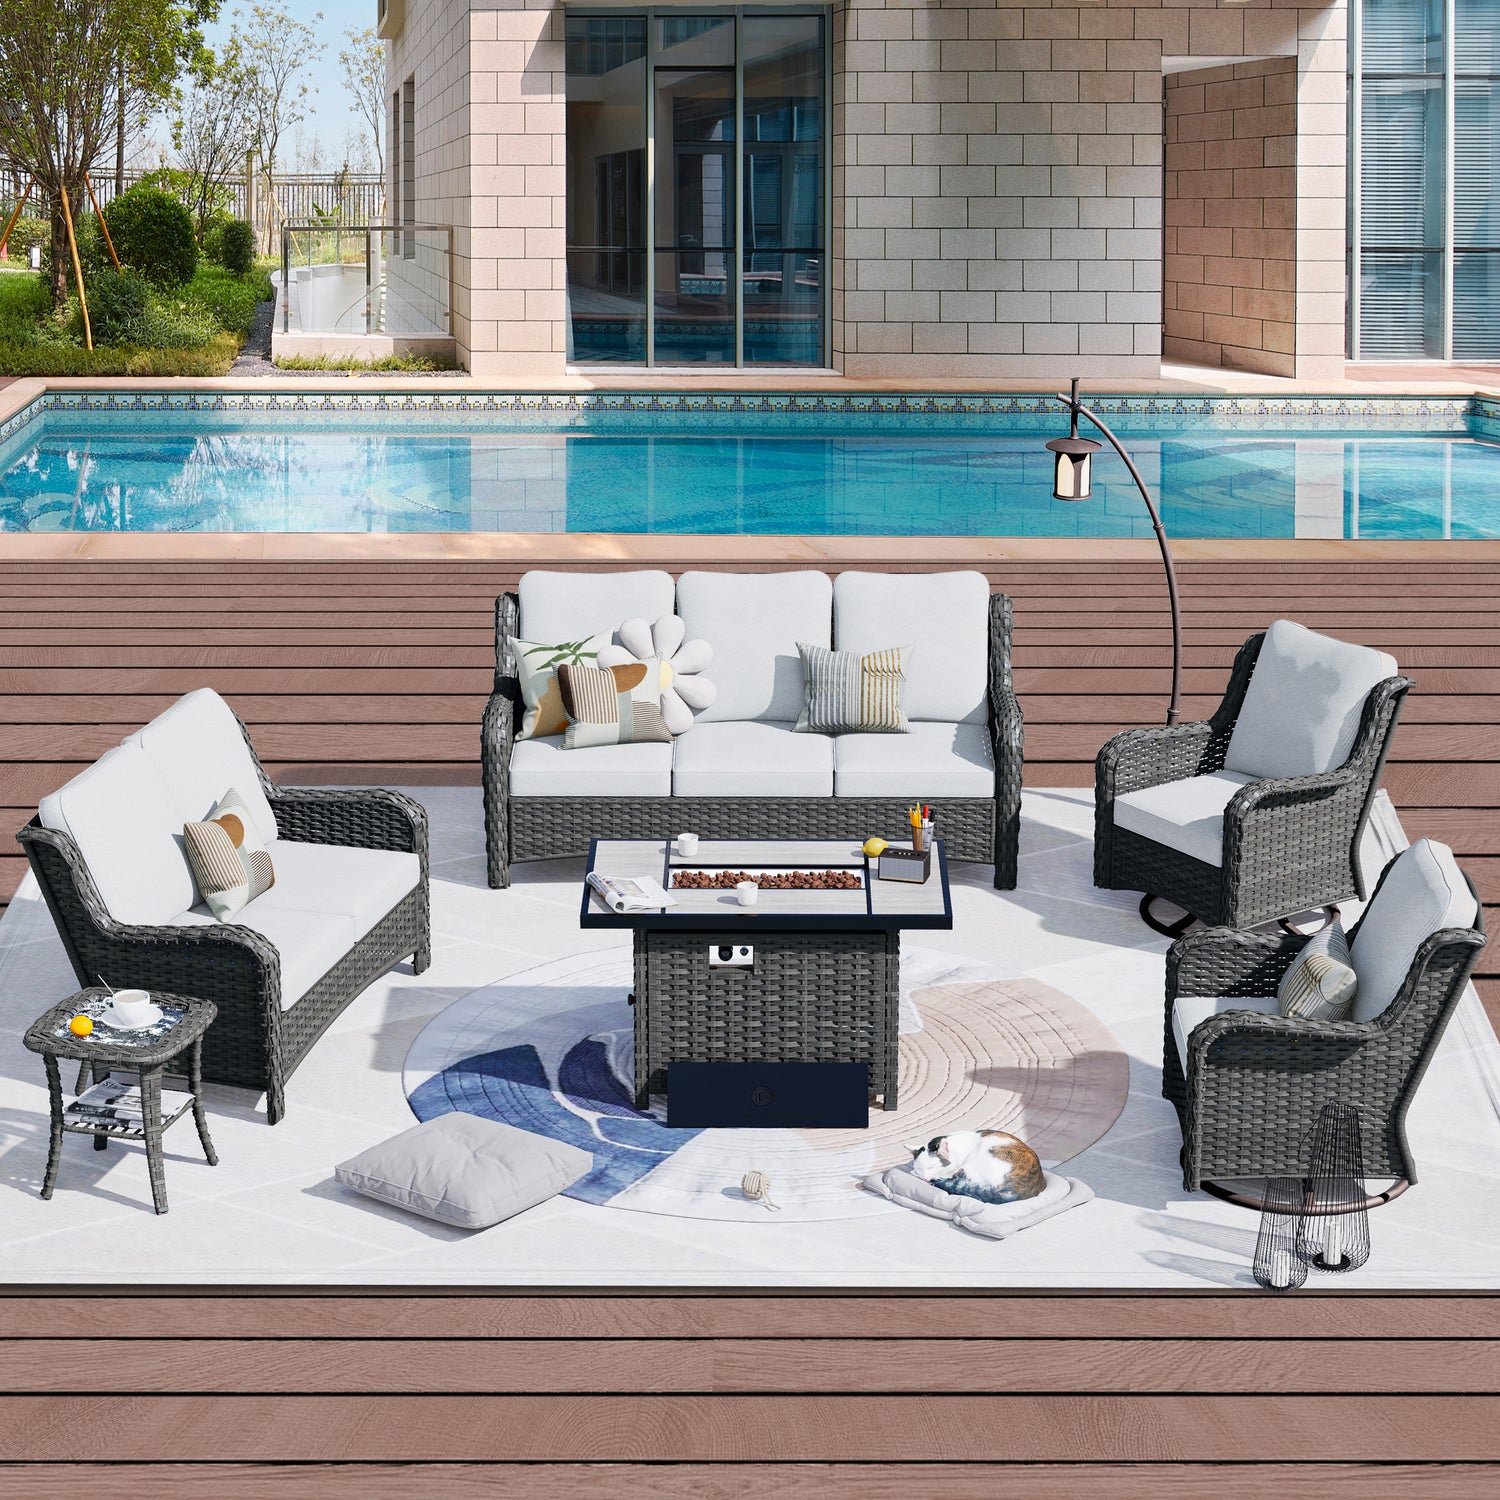 Creating a Cozy Outdoor Space: Top Picks for Comfortable Patio Furniture